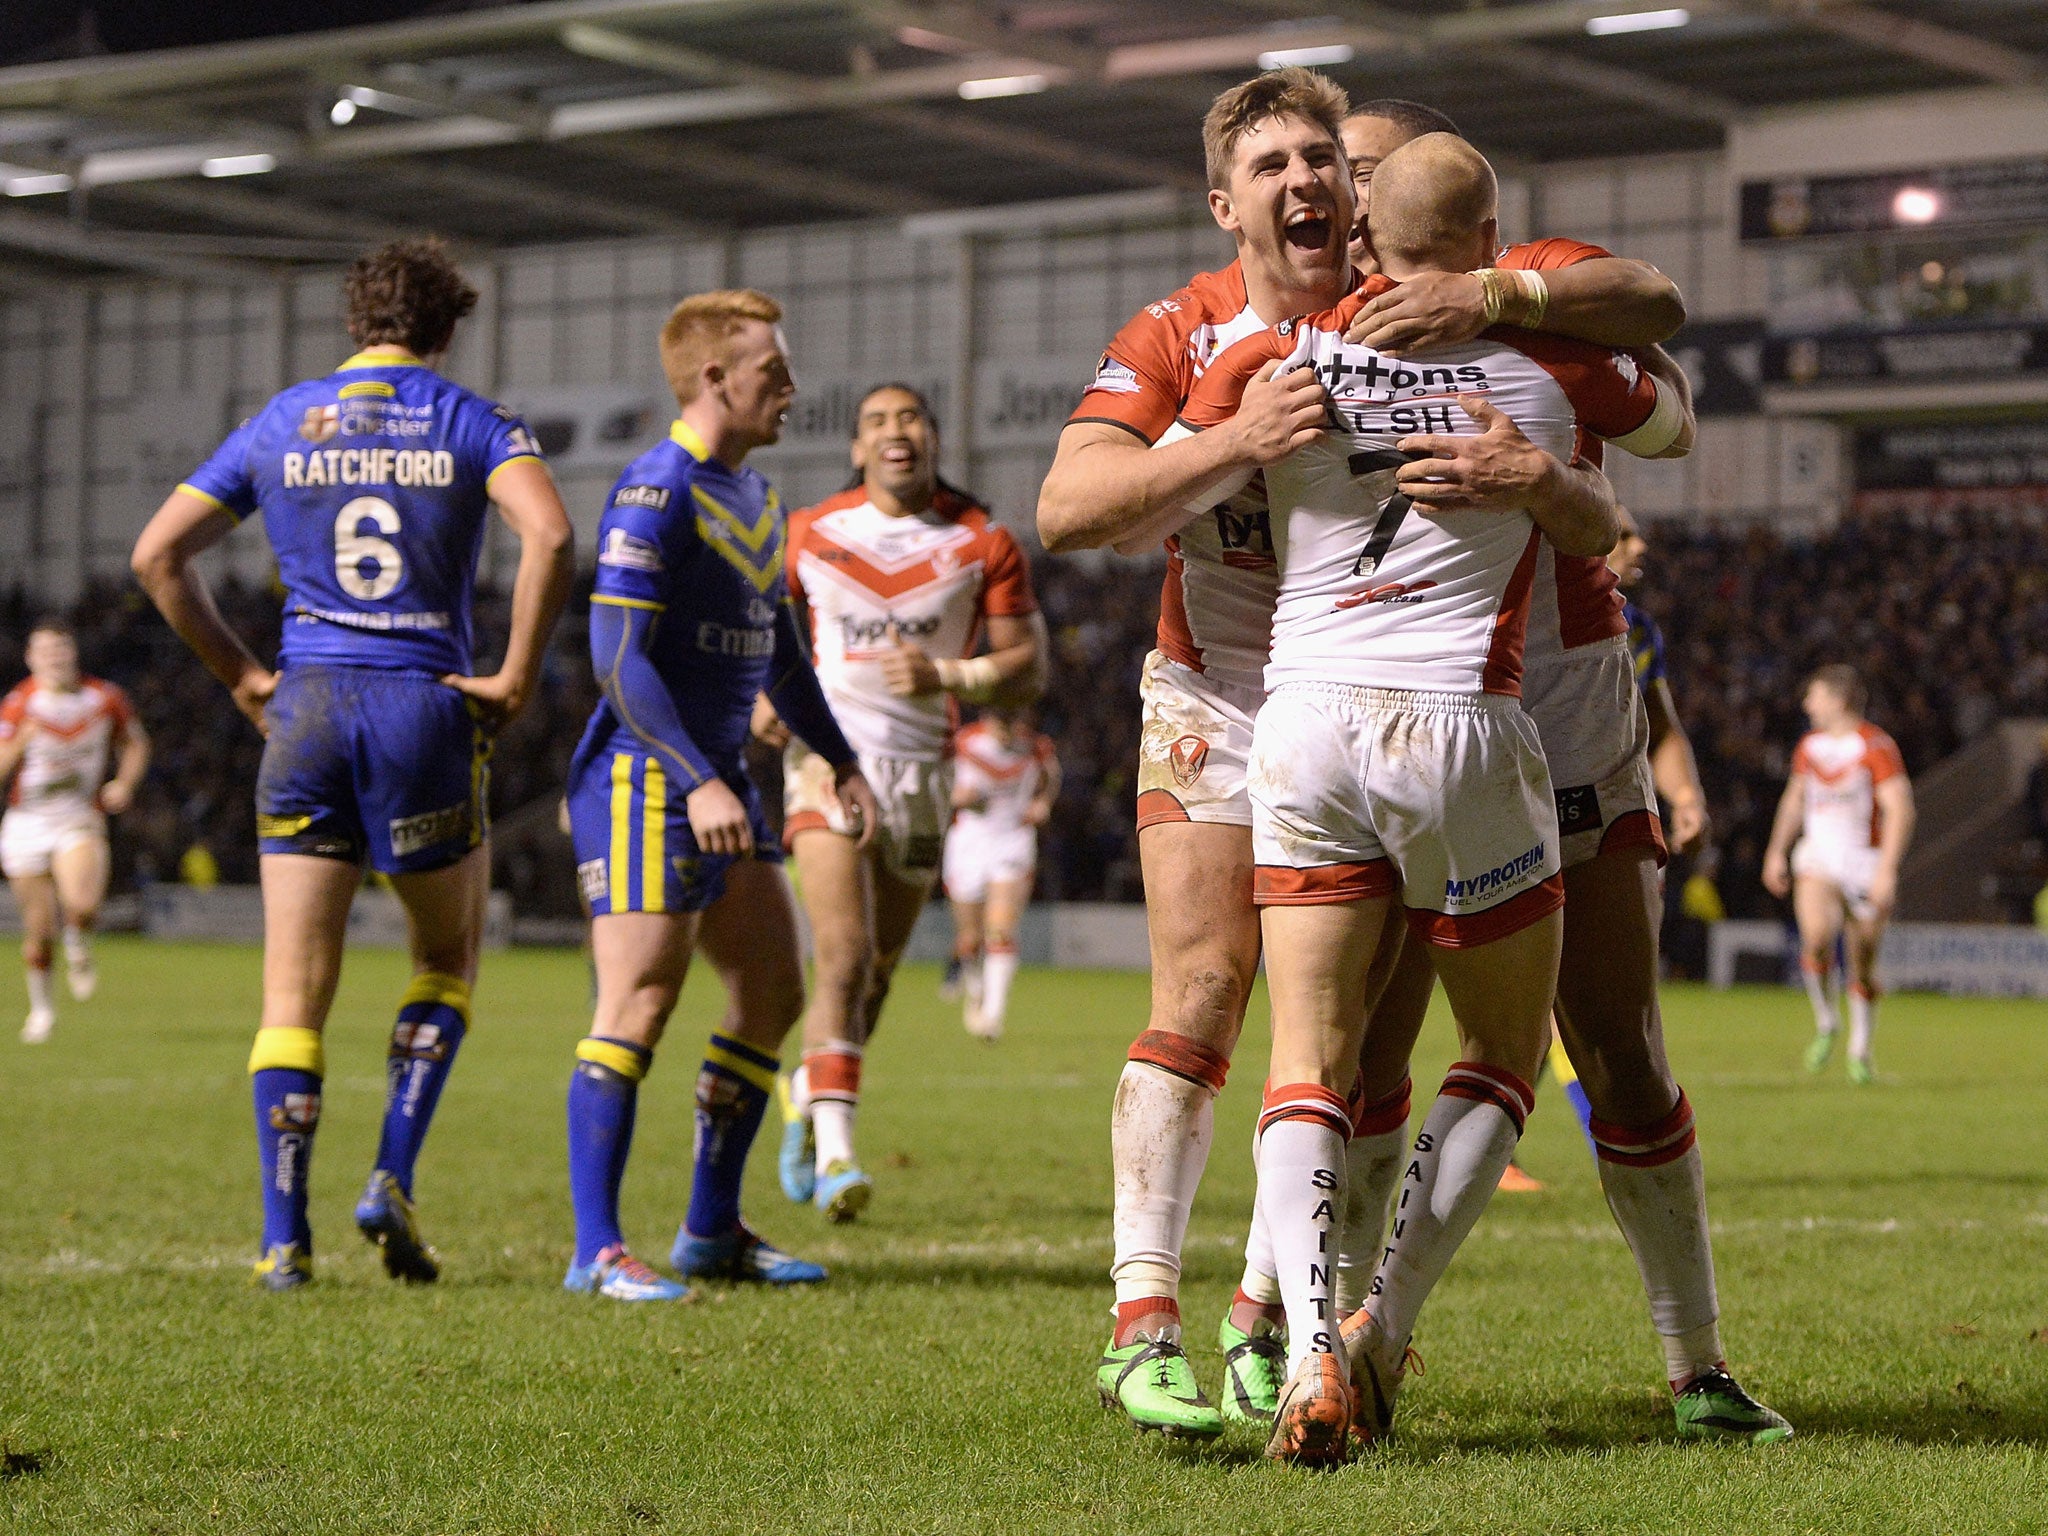 St Helens players celebrate after Luke Marsh scores the final try in the 38-8 win over Warrington Wolves